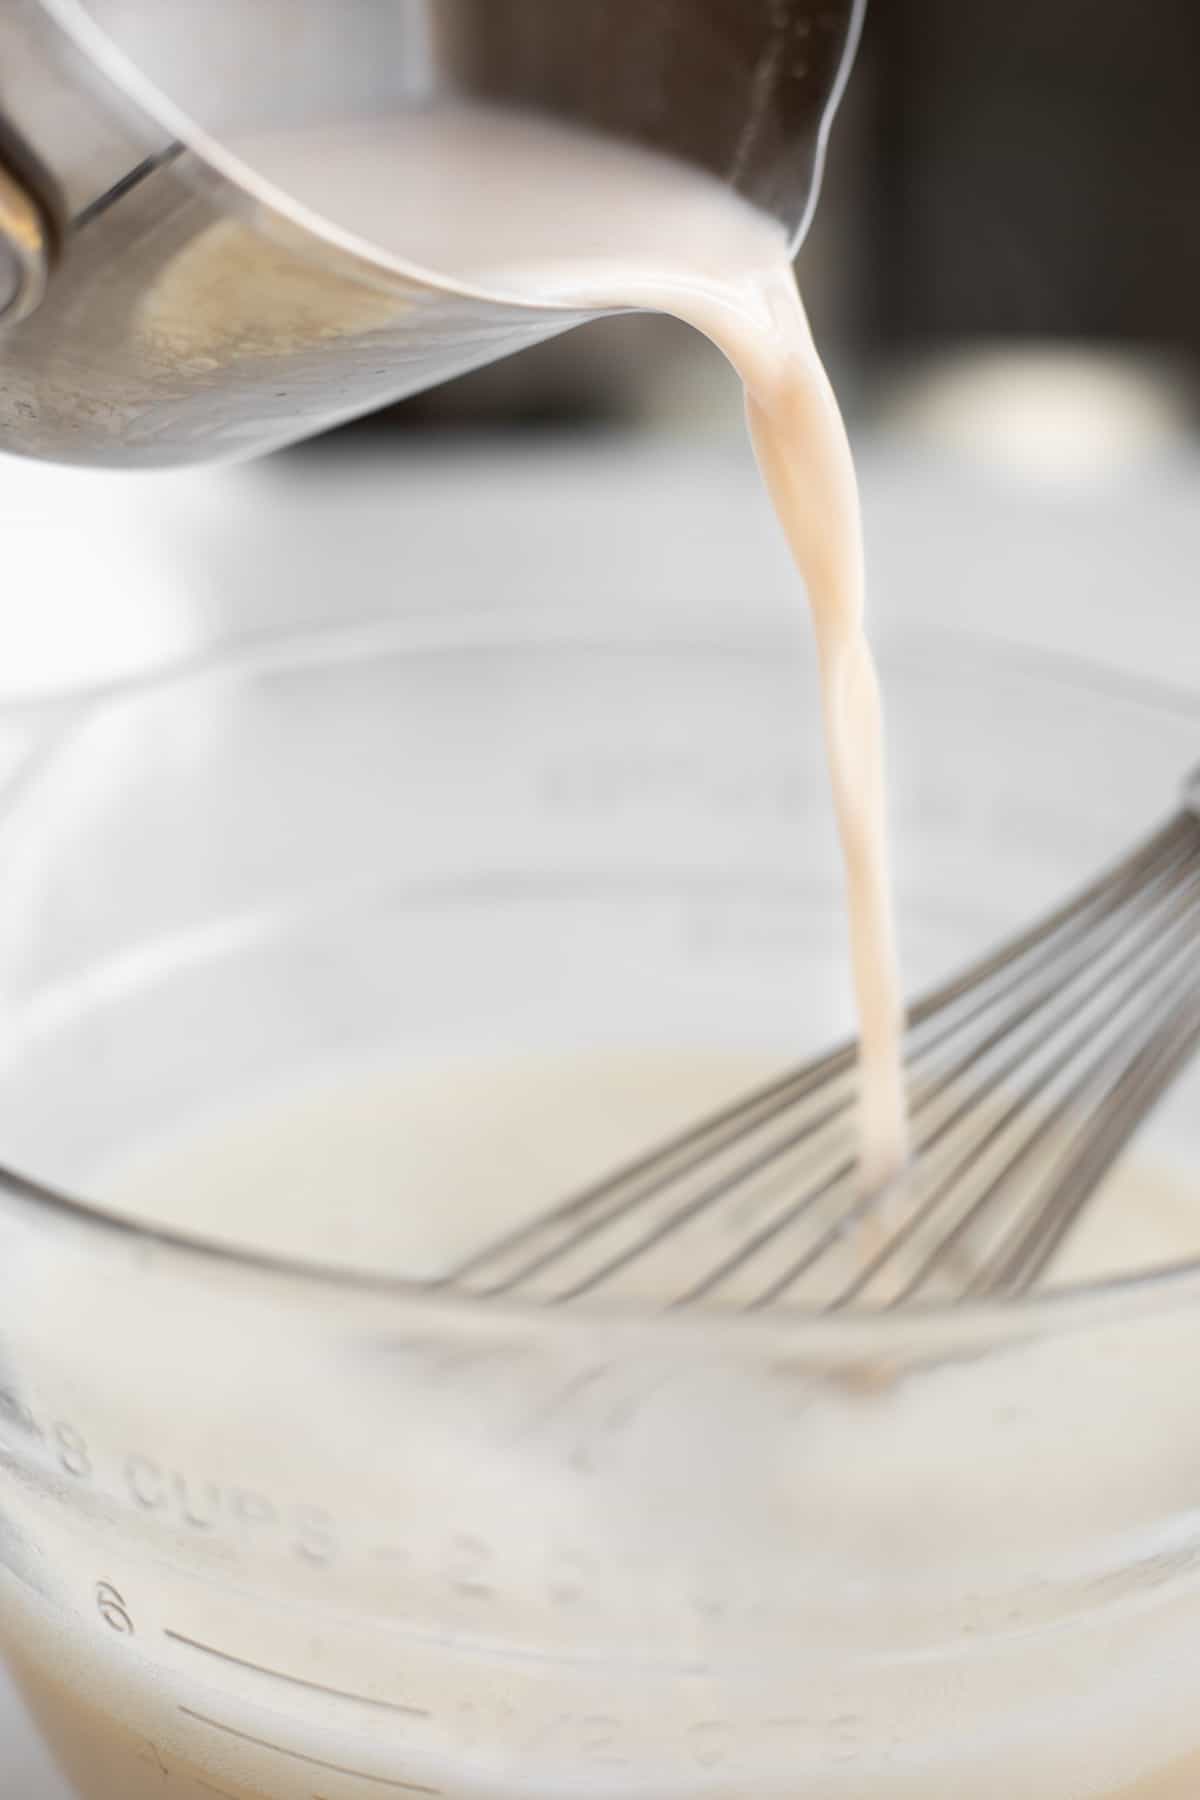 milk pouring into a glass bowl with a whisk.